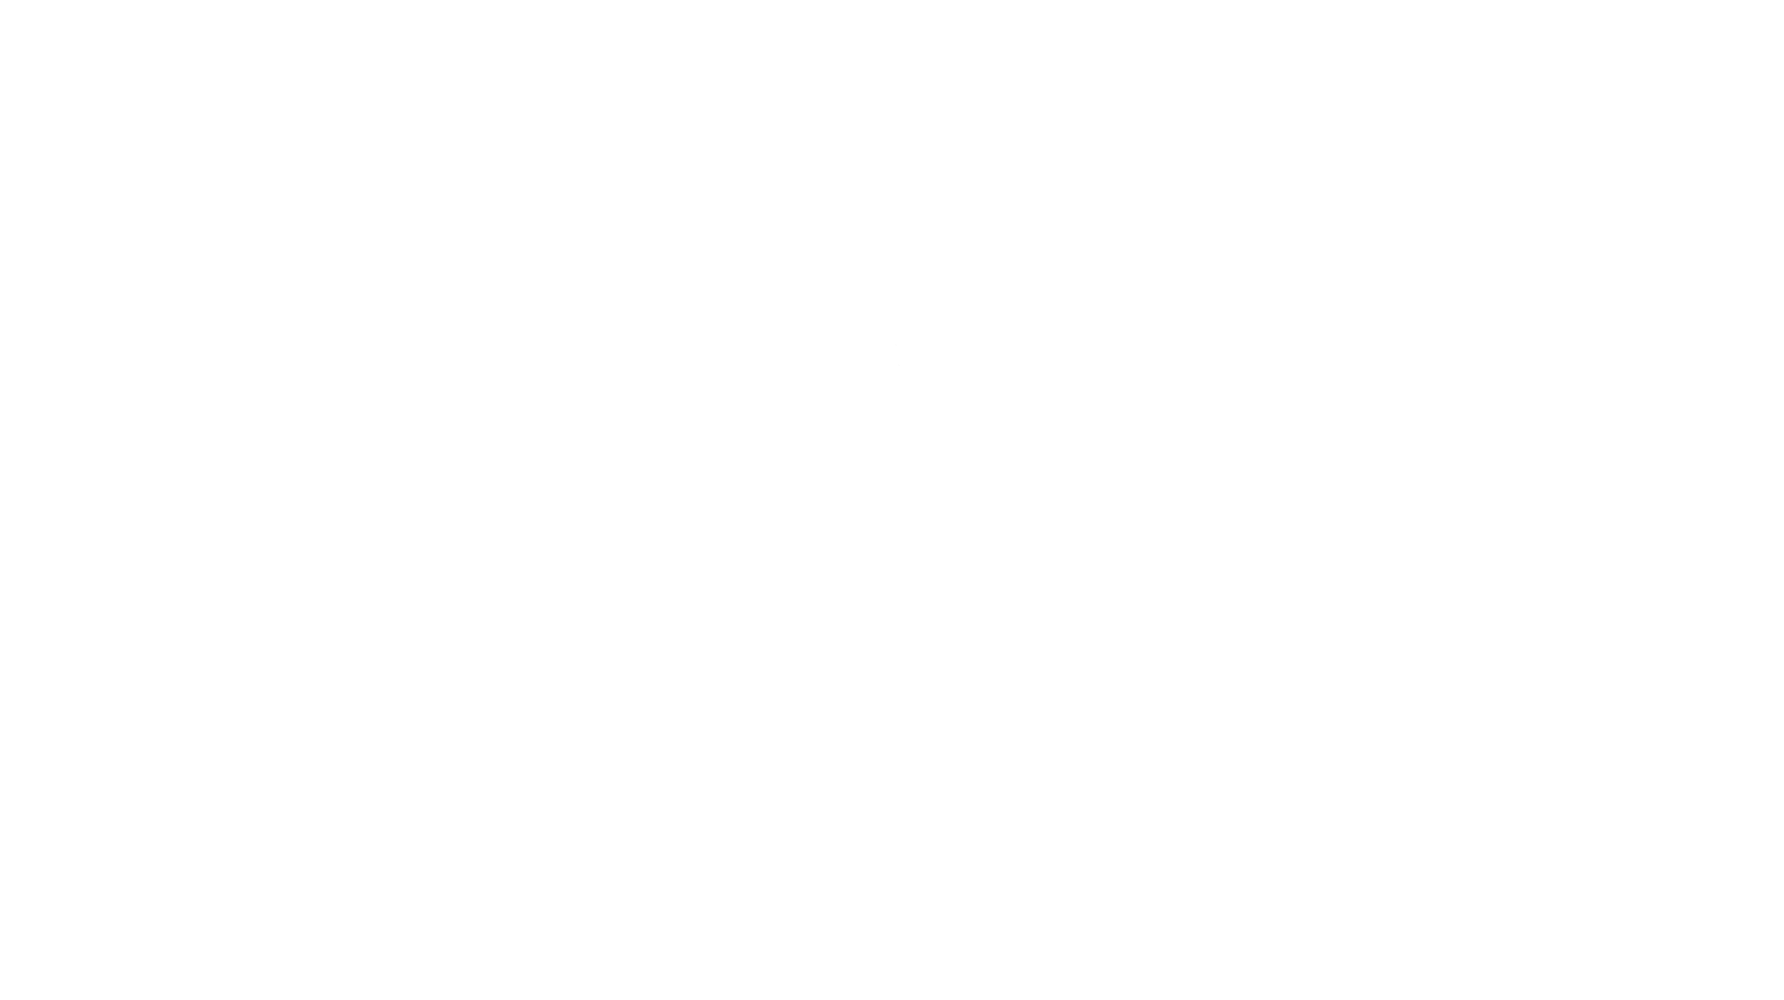 Pilchard productions